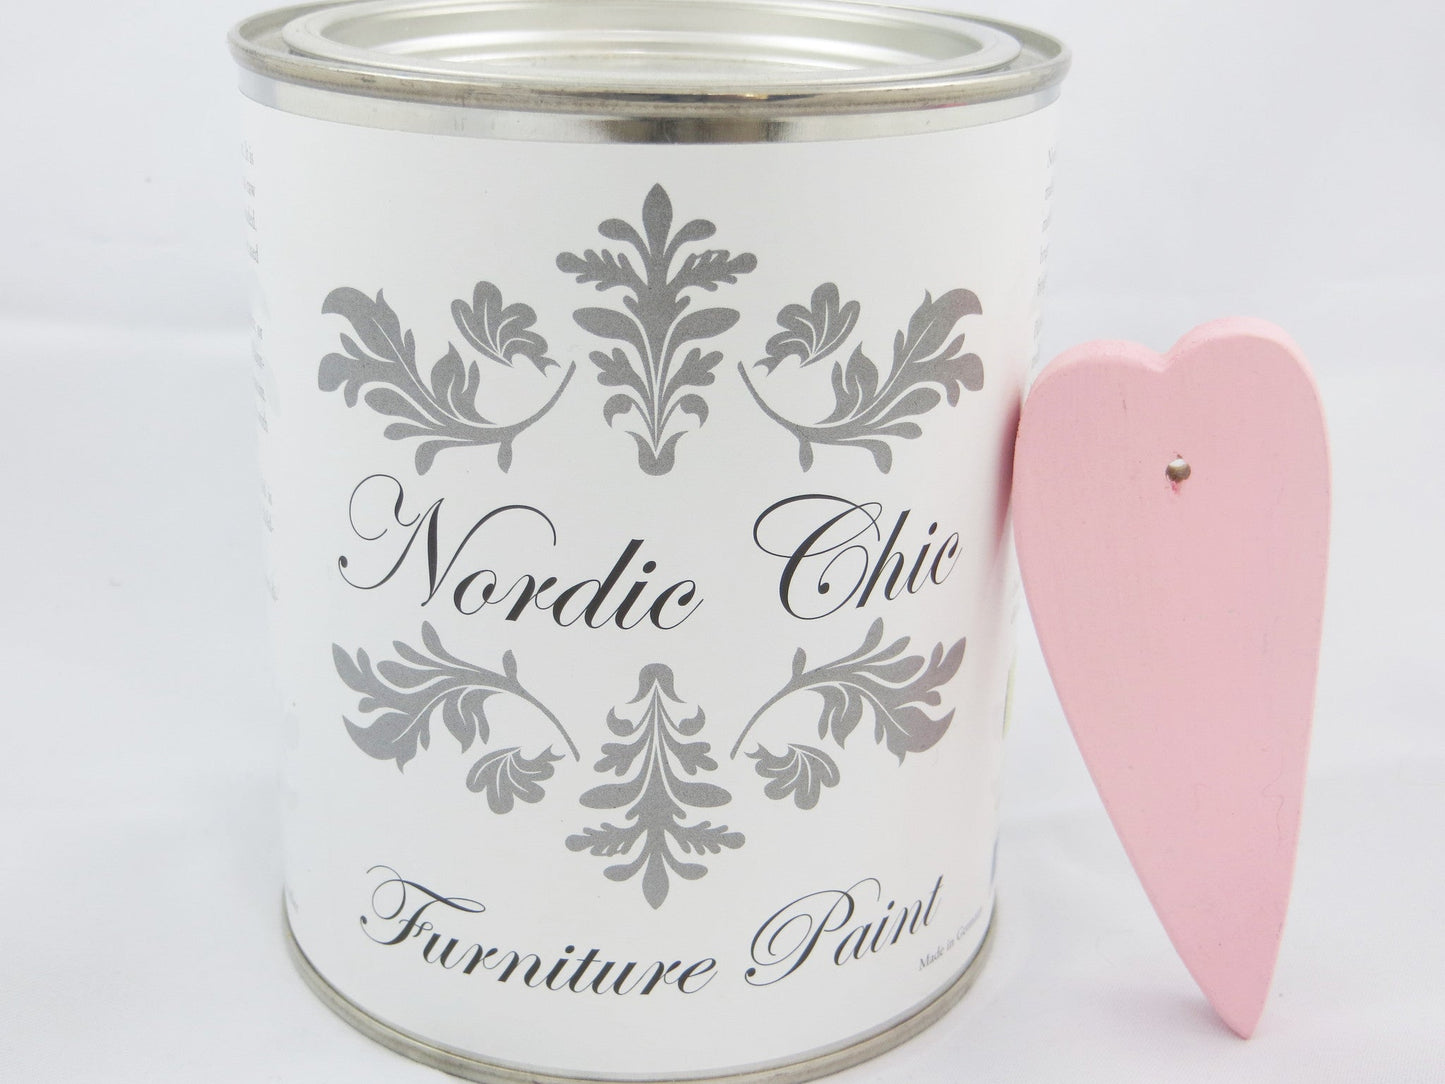 Nordic Chic Furniture Paint - Pink Icing - Nordic Chic®